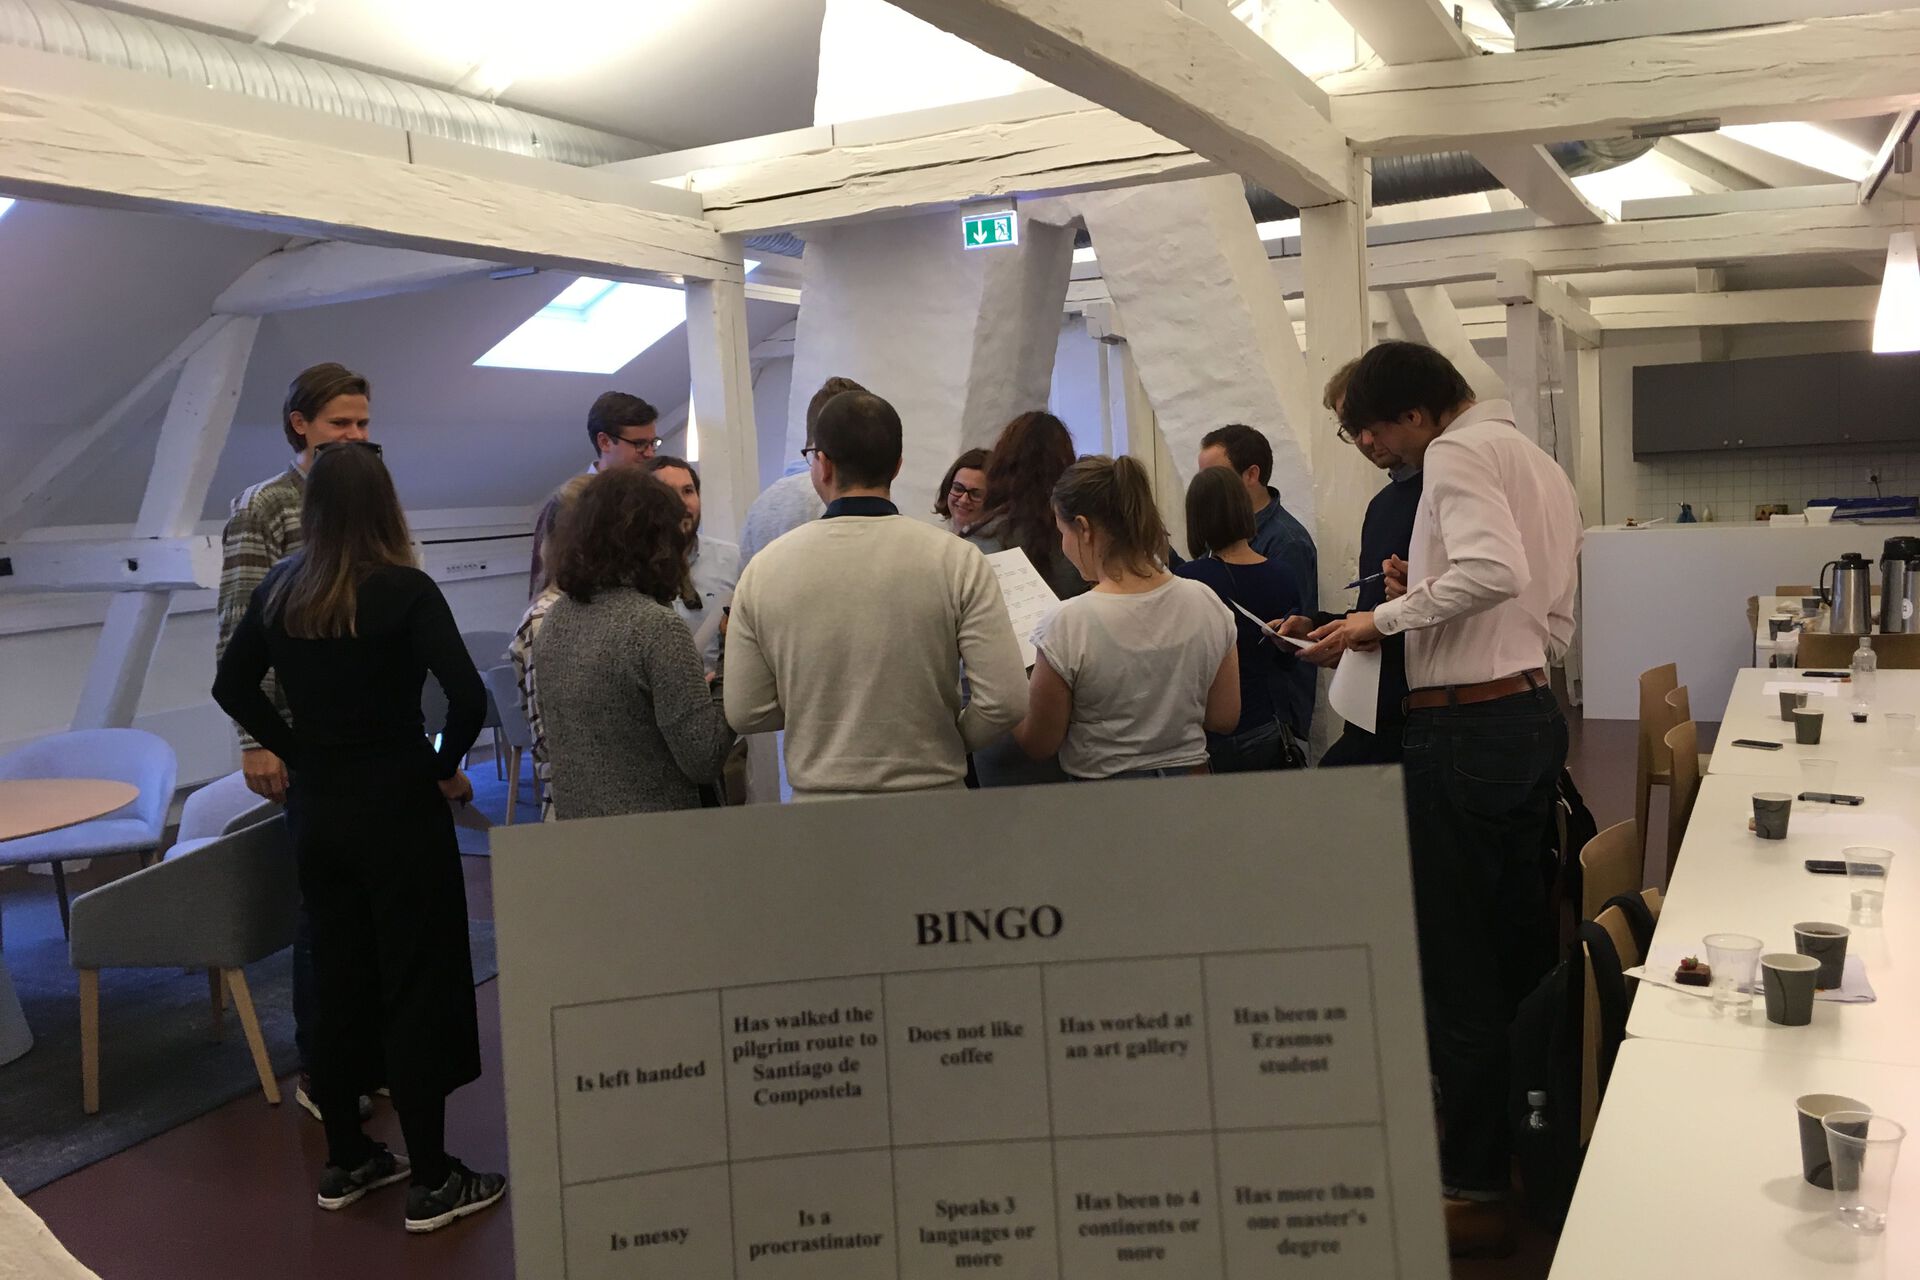 The 15 PhD researchers got to know each other better through a human bingo